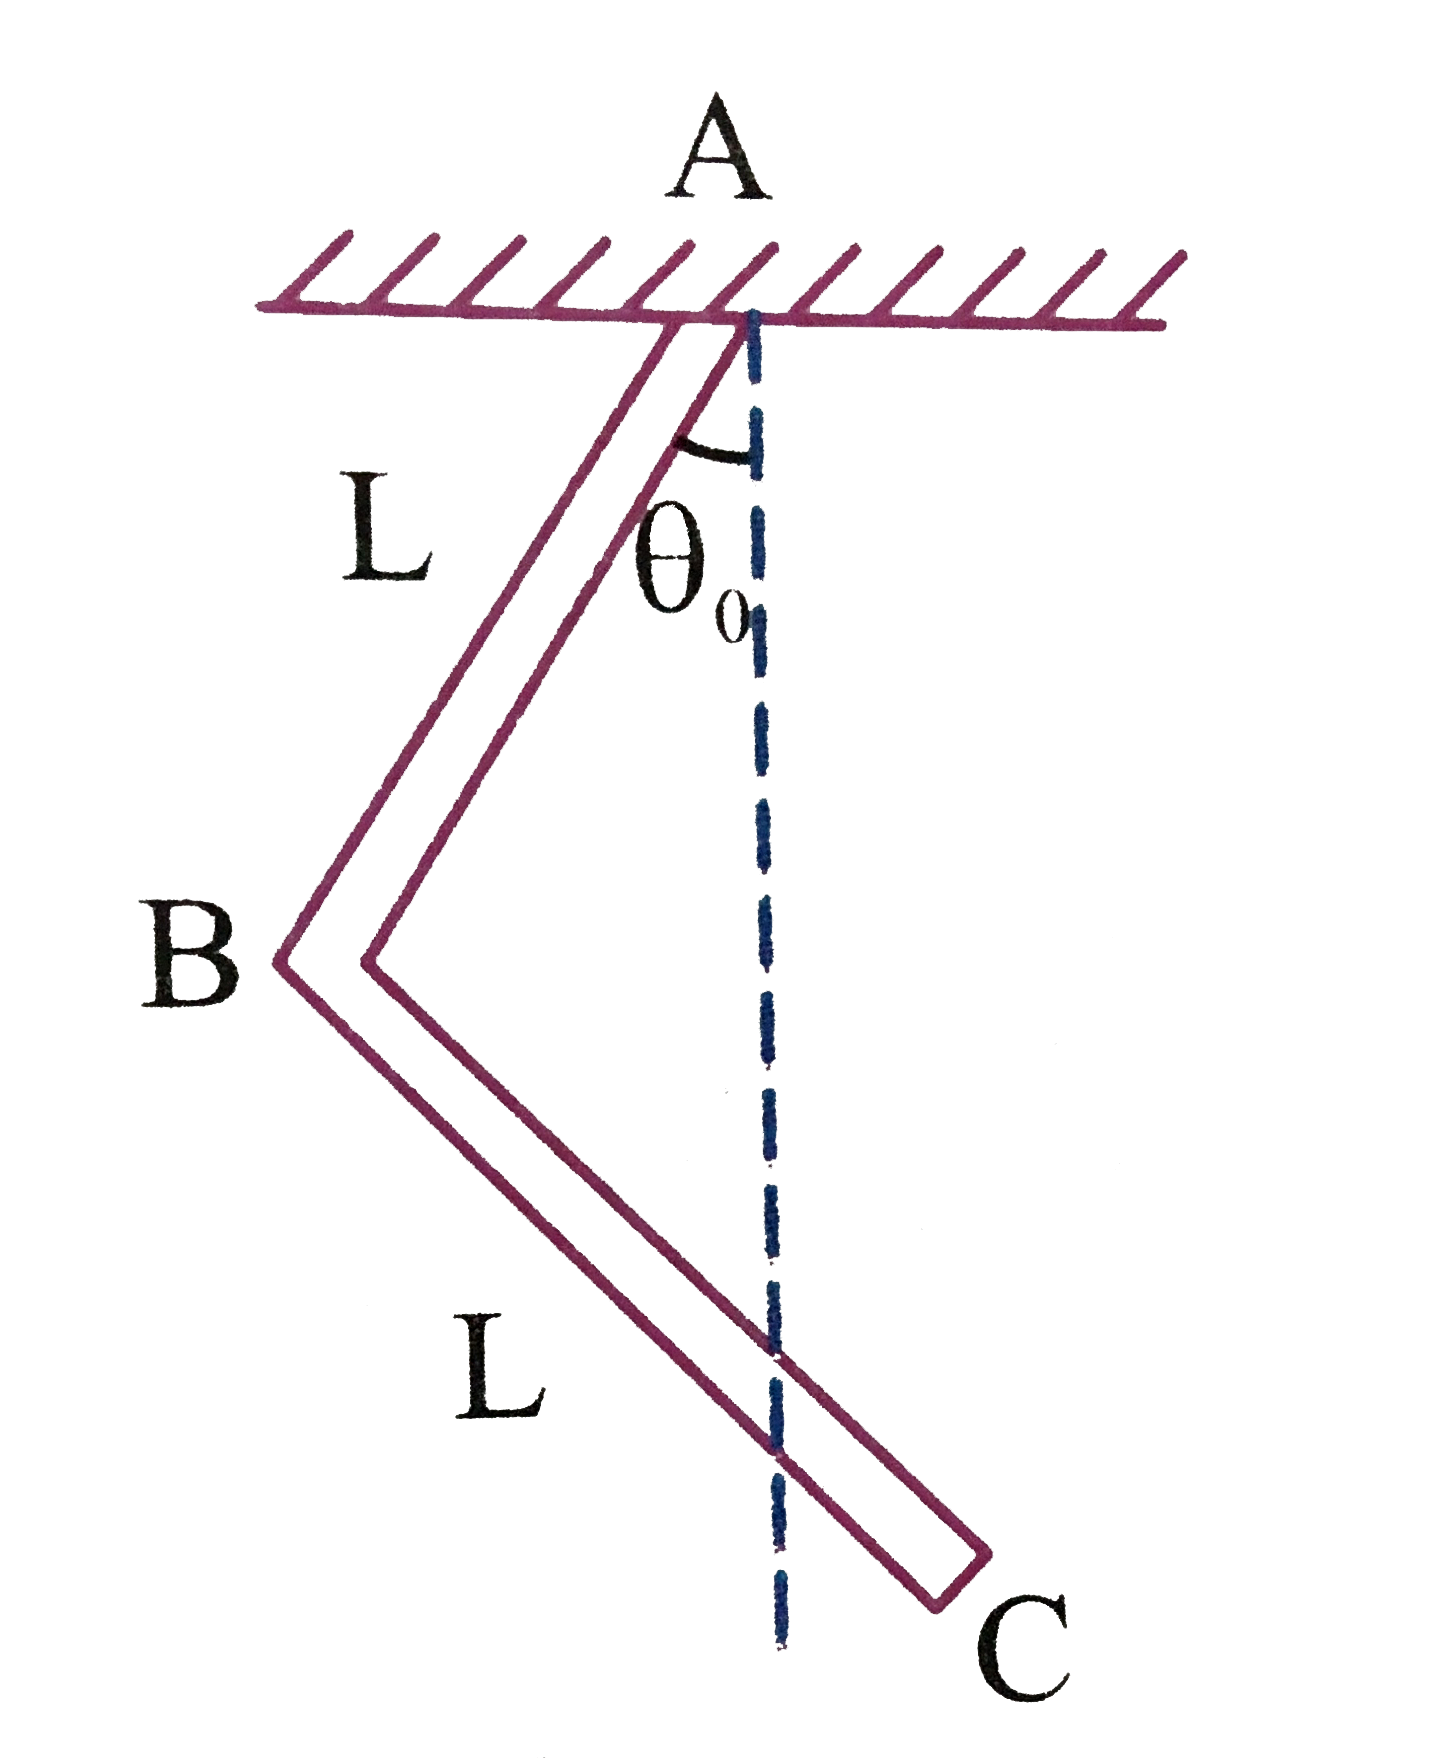 A L-shaped bar of mass M is pivoted at one of its end so that it can freely rotate in a vertical plane as shwon. If it is slightly displaced from its equilibrium position then the frequency of oscillation is…….